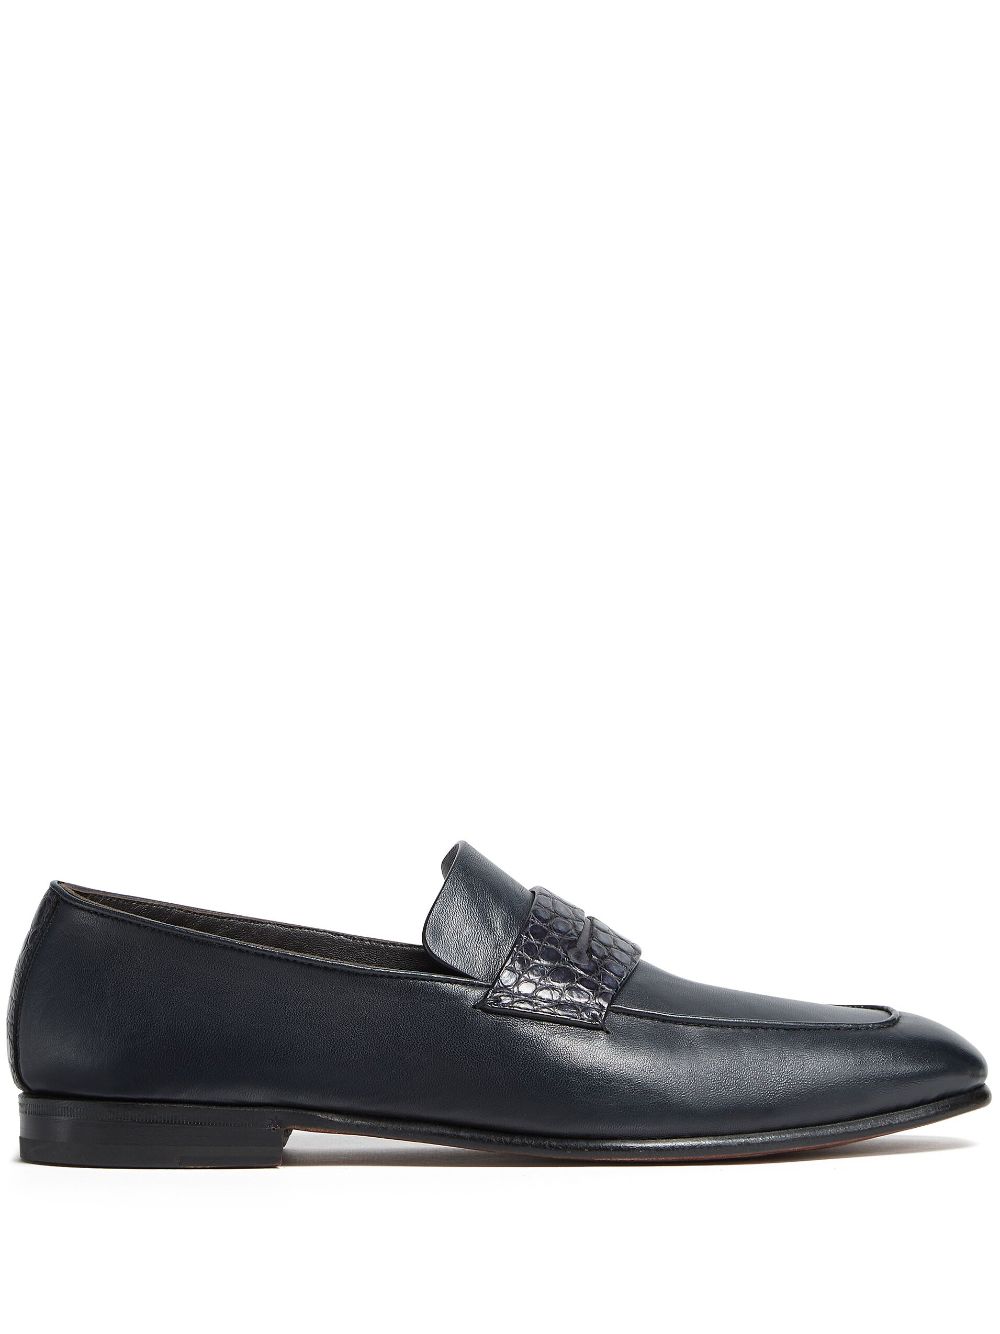 L'Asola leather loafers